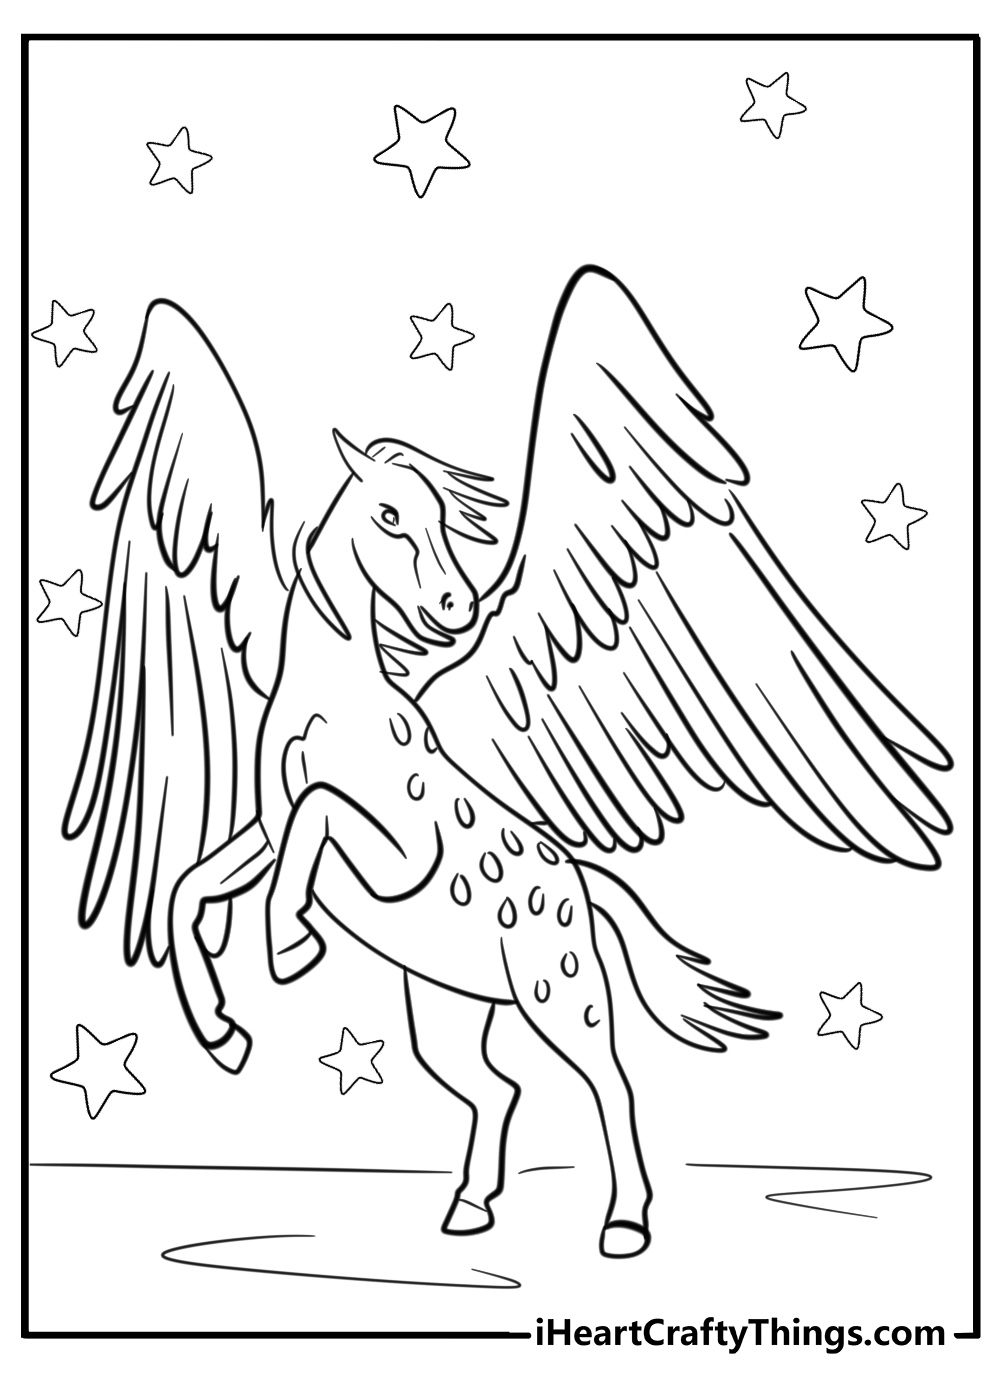 Spotted pegasus coloring page flying